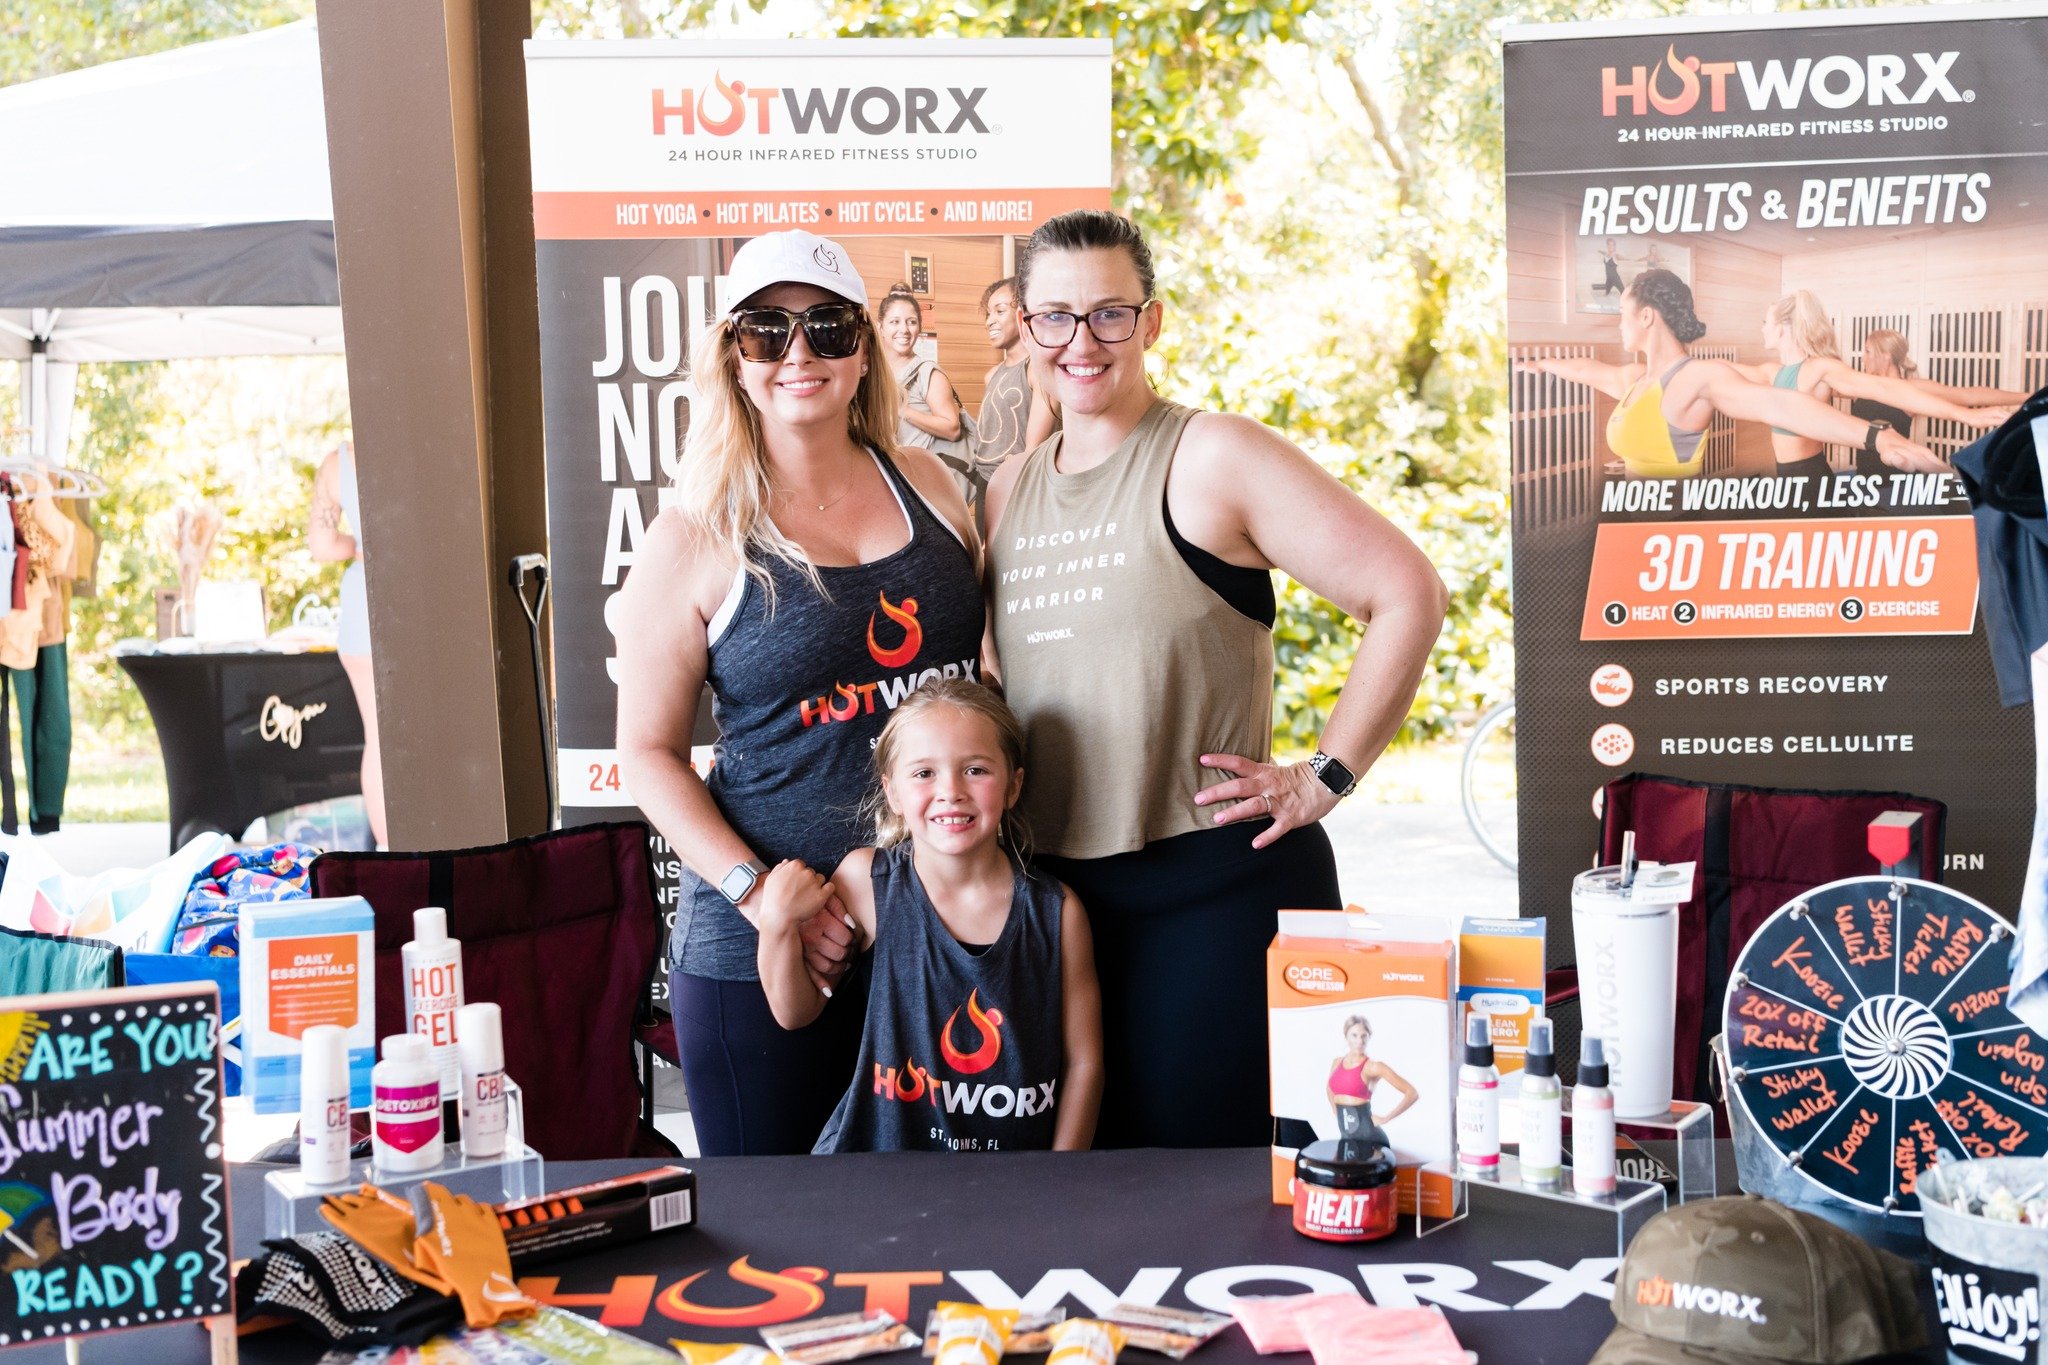 Local Partner Thursday&mdash; @hotworxst.johnsdurbinpavilion. Grab your towel and get ready to sweat! Hotworx is a virtually instructed exercise program created for users to experience the many benefits of infrared heat absorption, while completing a